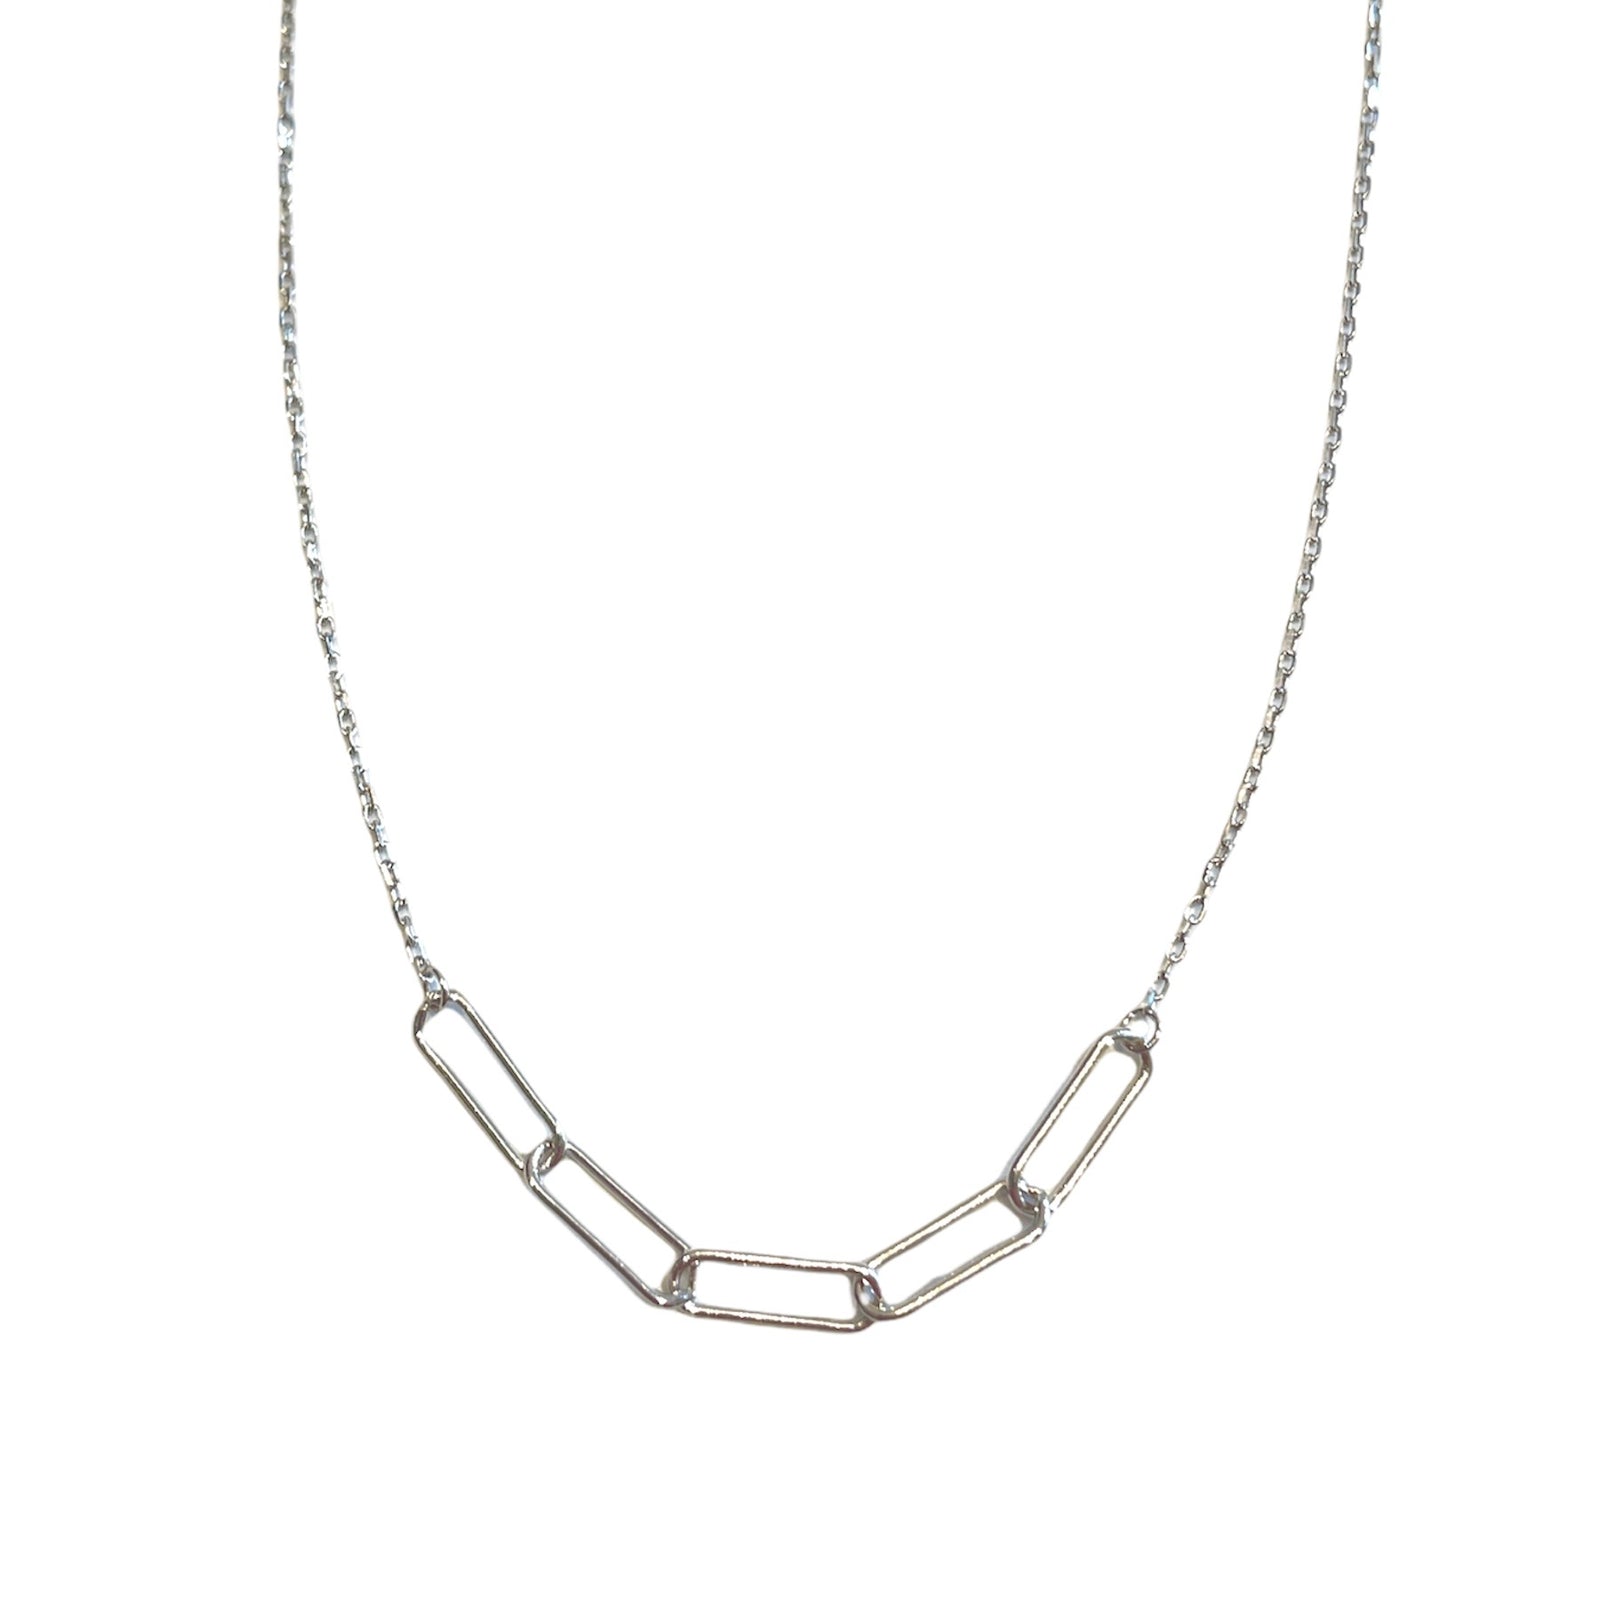 Small Paperclip at front necklace